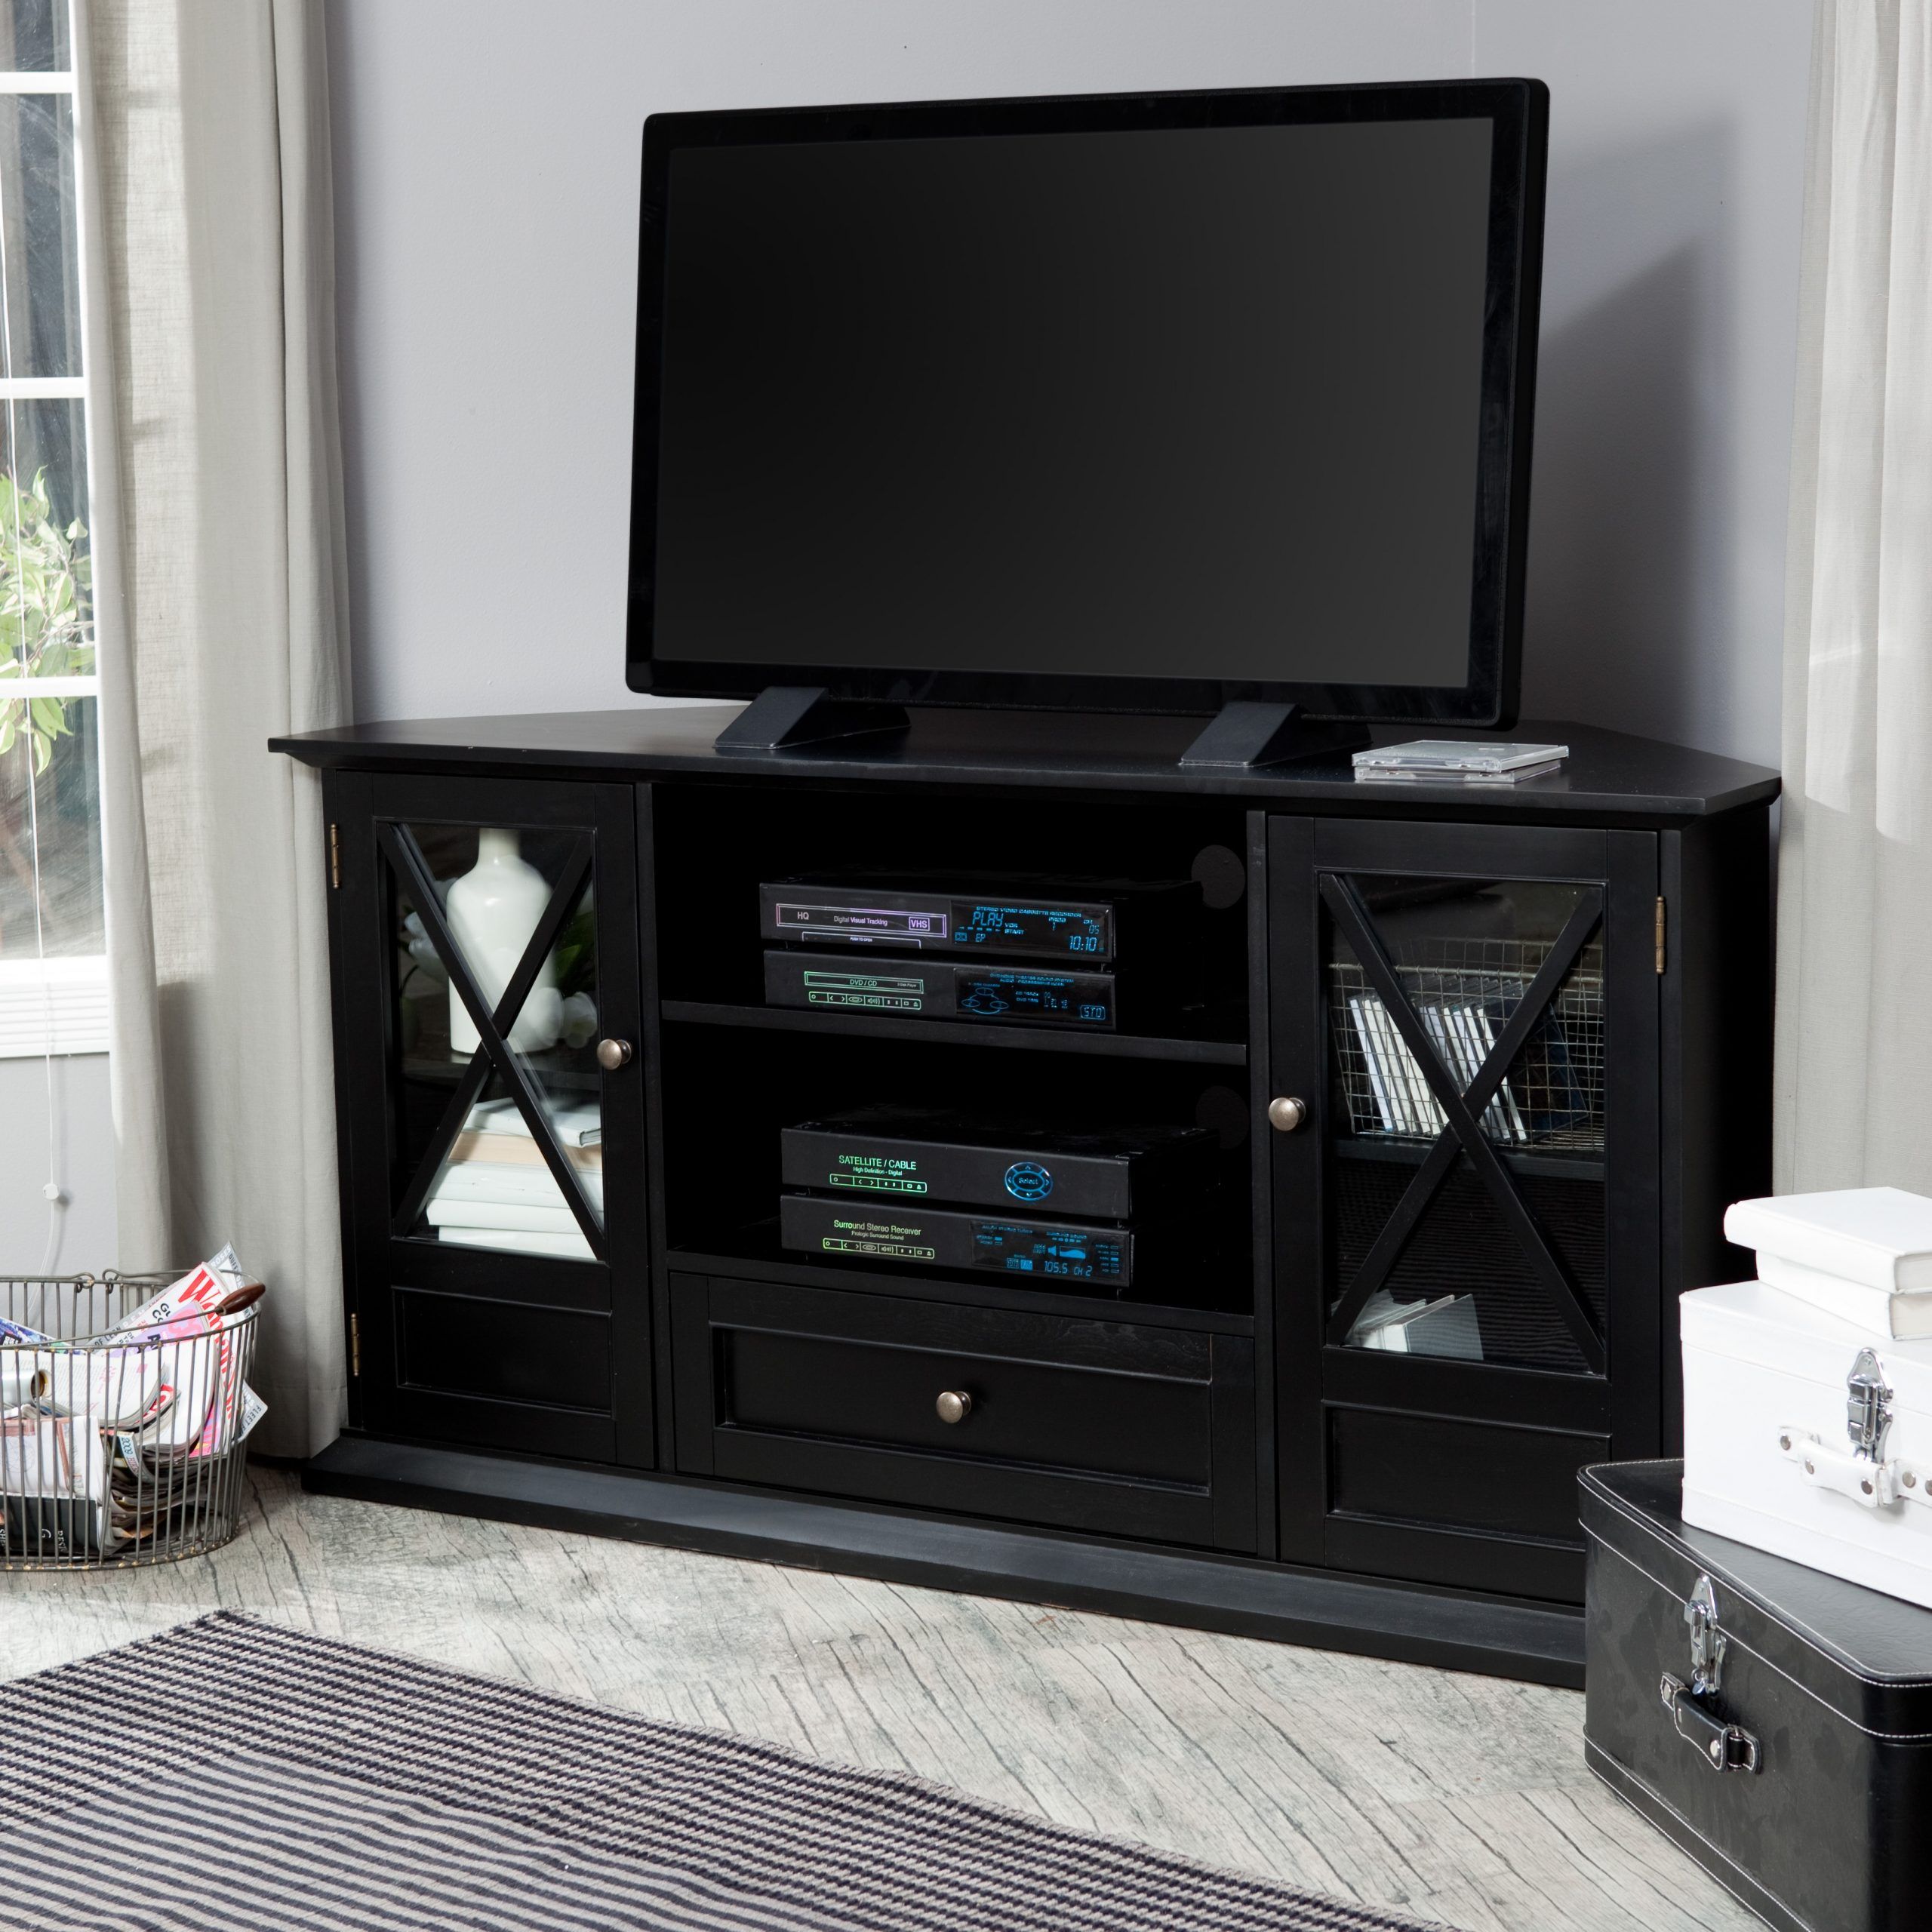 The Hampton Corner Tv Stand – Black At Hayneedle Intended For Black Tv Stands (View 11 of 15)